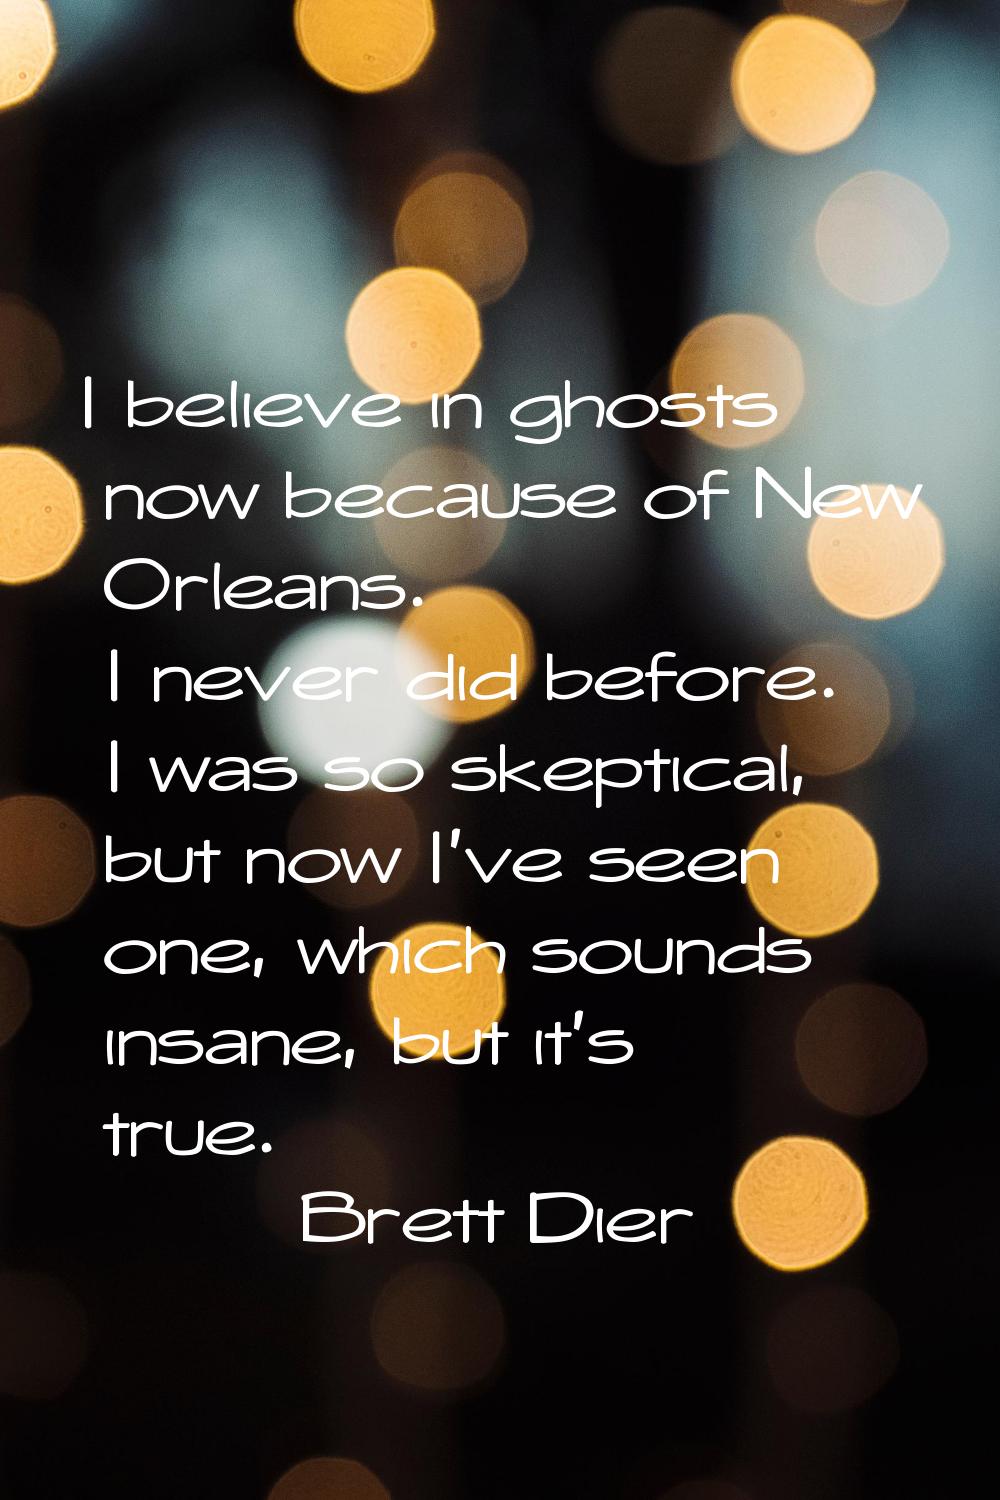 I believe in ghosts now because of New Orleans. I never did before. I was so skeptical, but now I'v